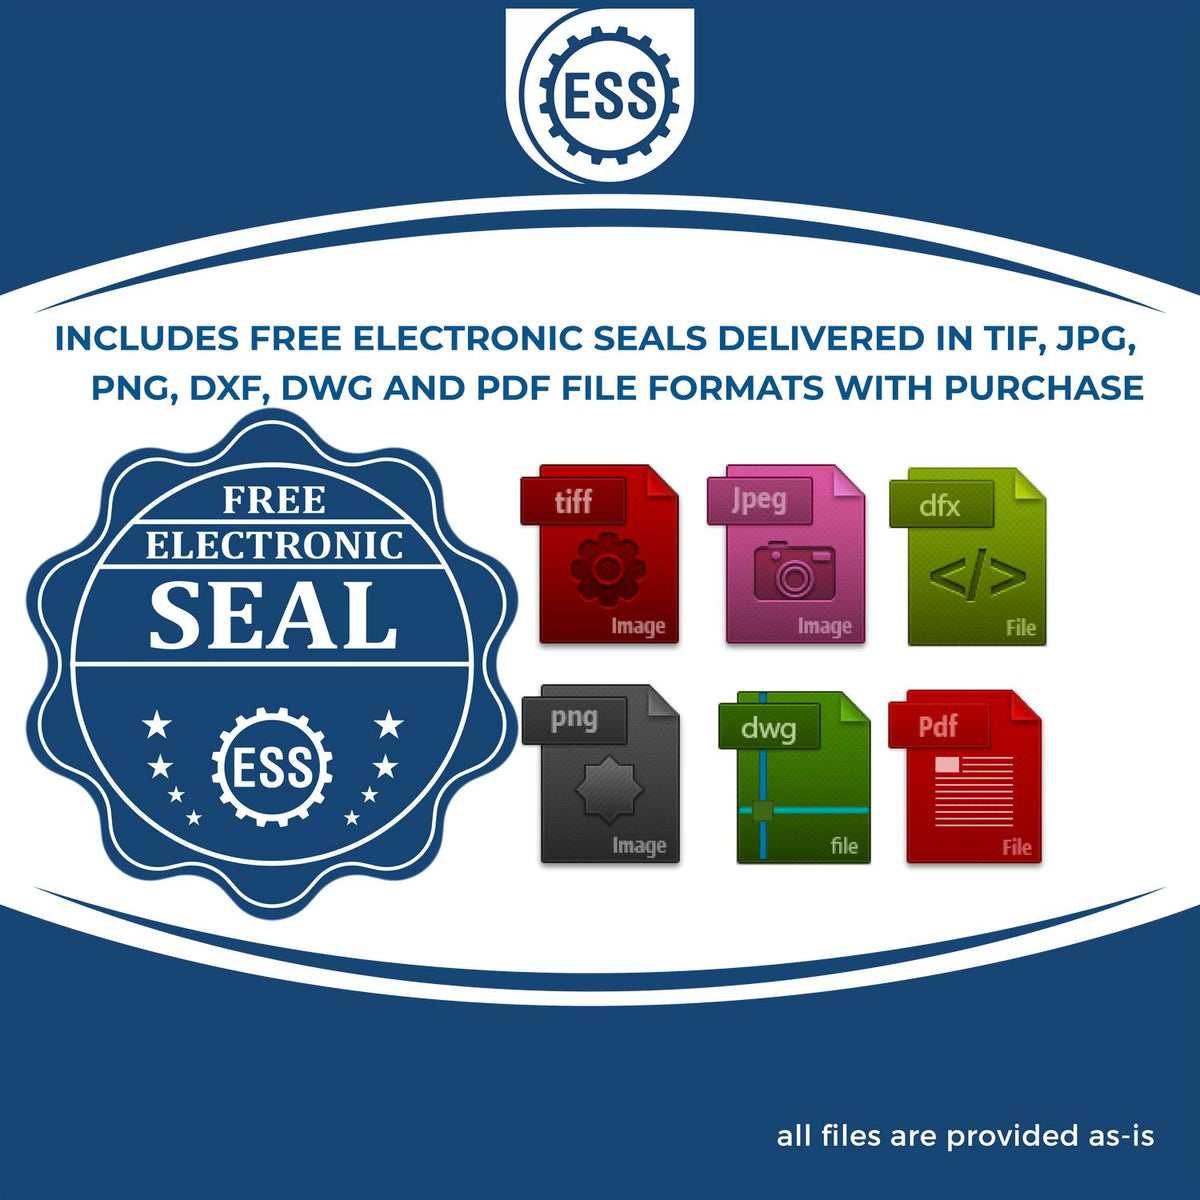 An infographic for the free electronic seal for the Heavy-Duty Arkansas Rectangular Notary Stamp illustrating the different file type icons such as DXF, DWG, TIF, JPG and PNG.